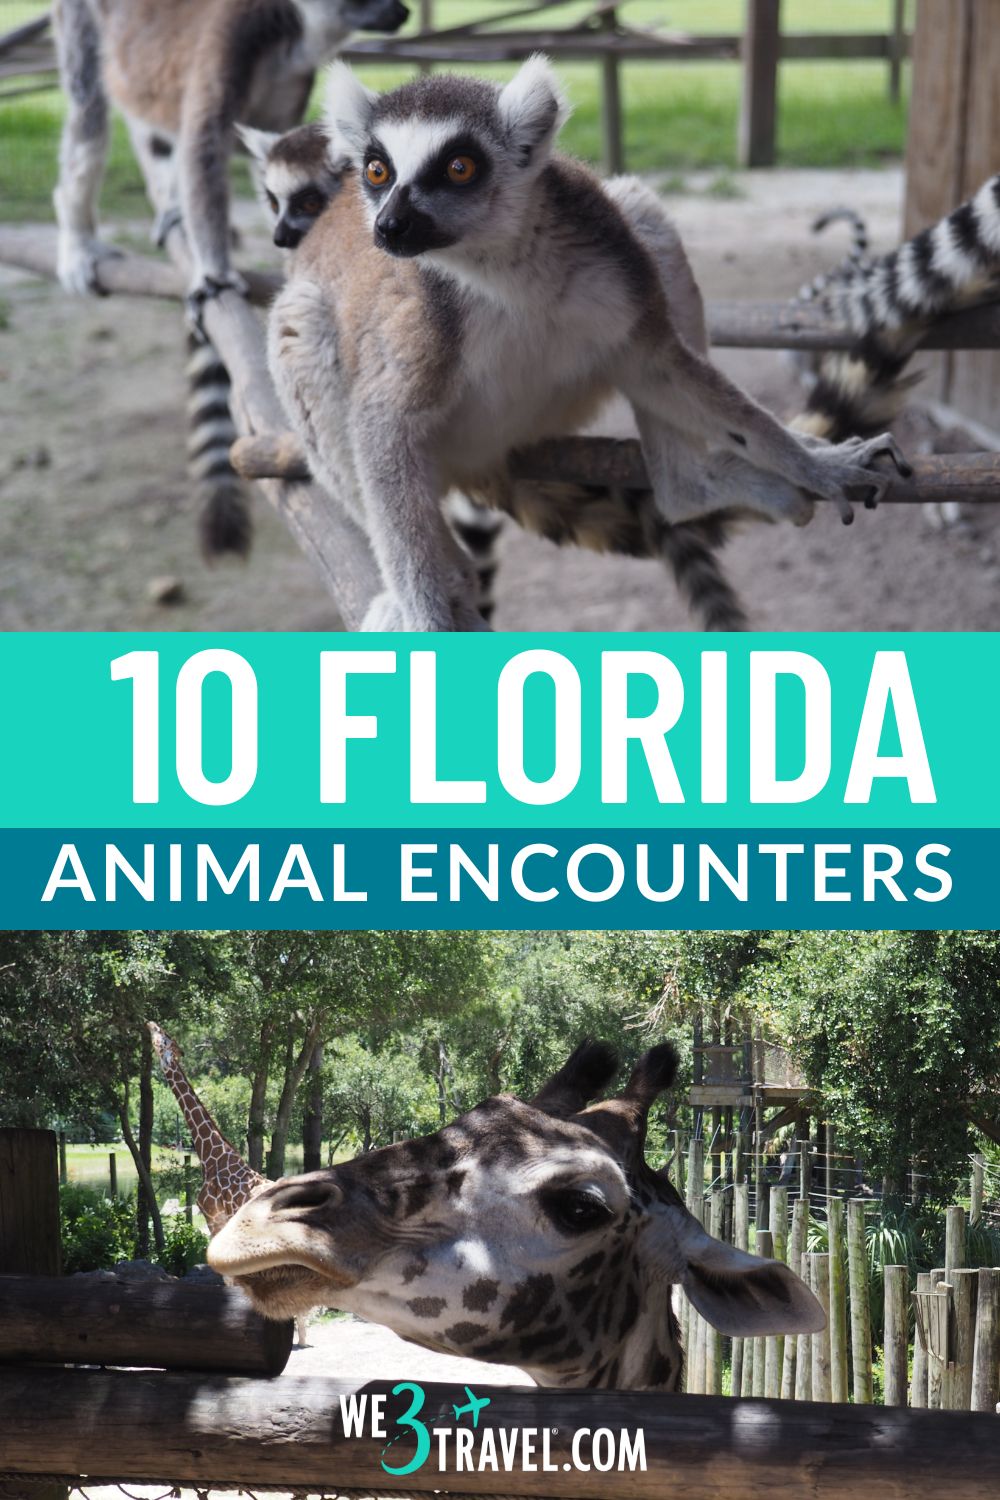 Feed a lemur, pet a penguin, train a gator, kayak past giraffes...these are just a few of the many fun animal encounters in Florida.